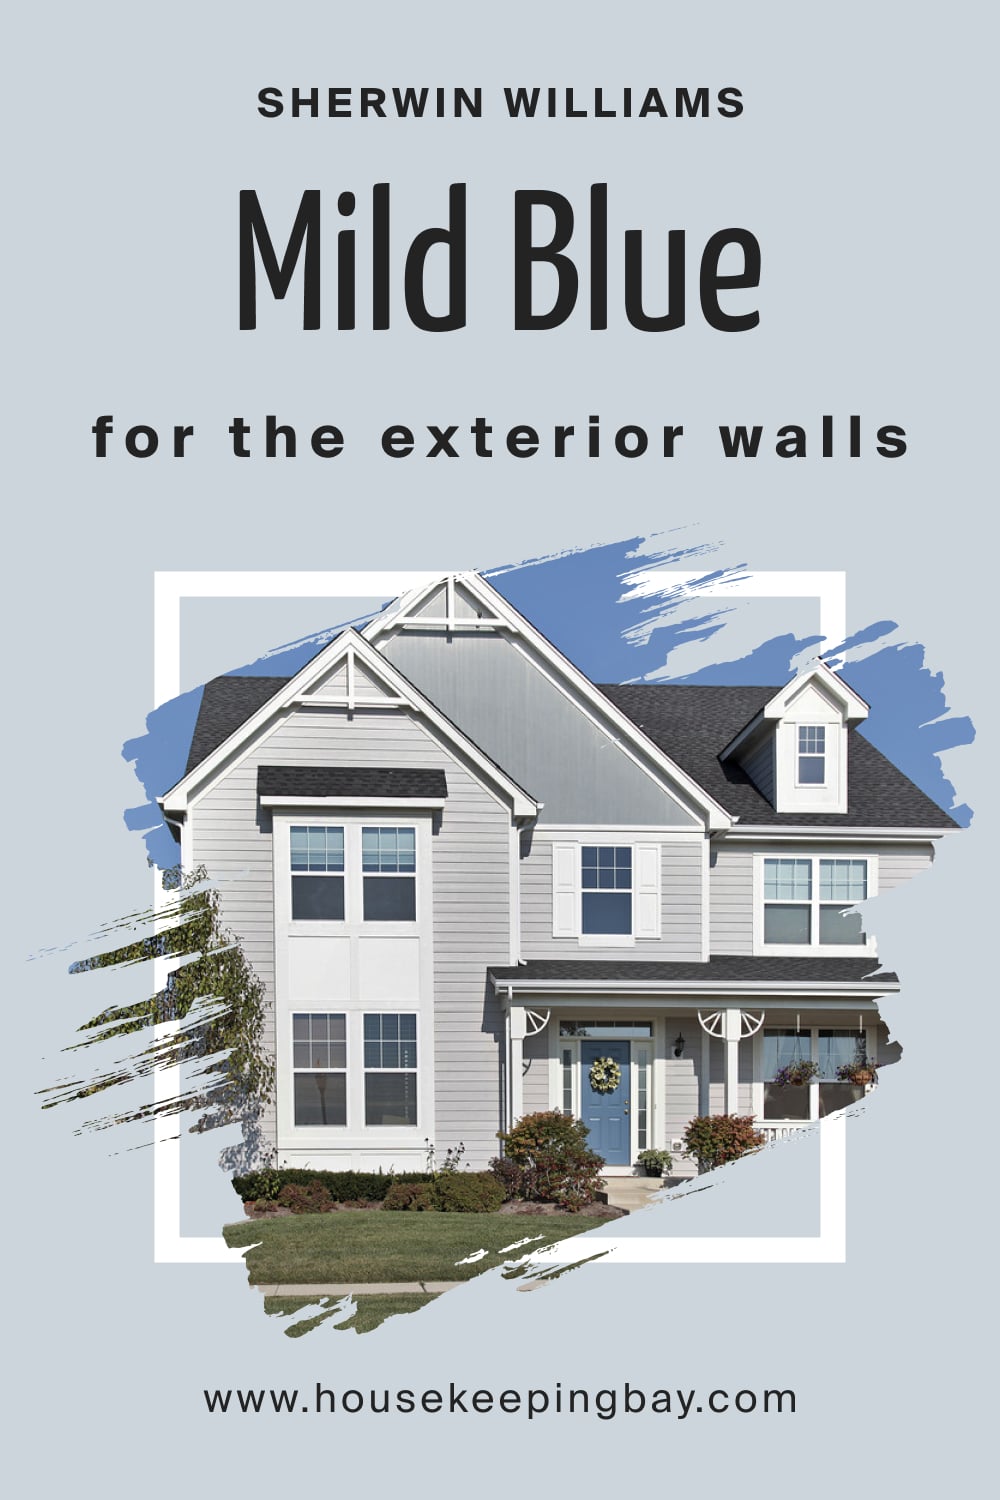 Sherwin Williams.Mild Blue SW 6533 For the exterior